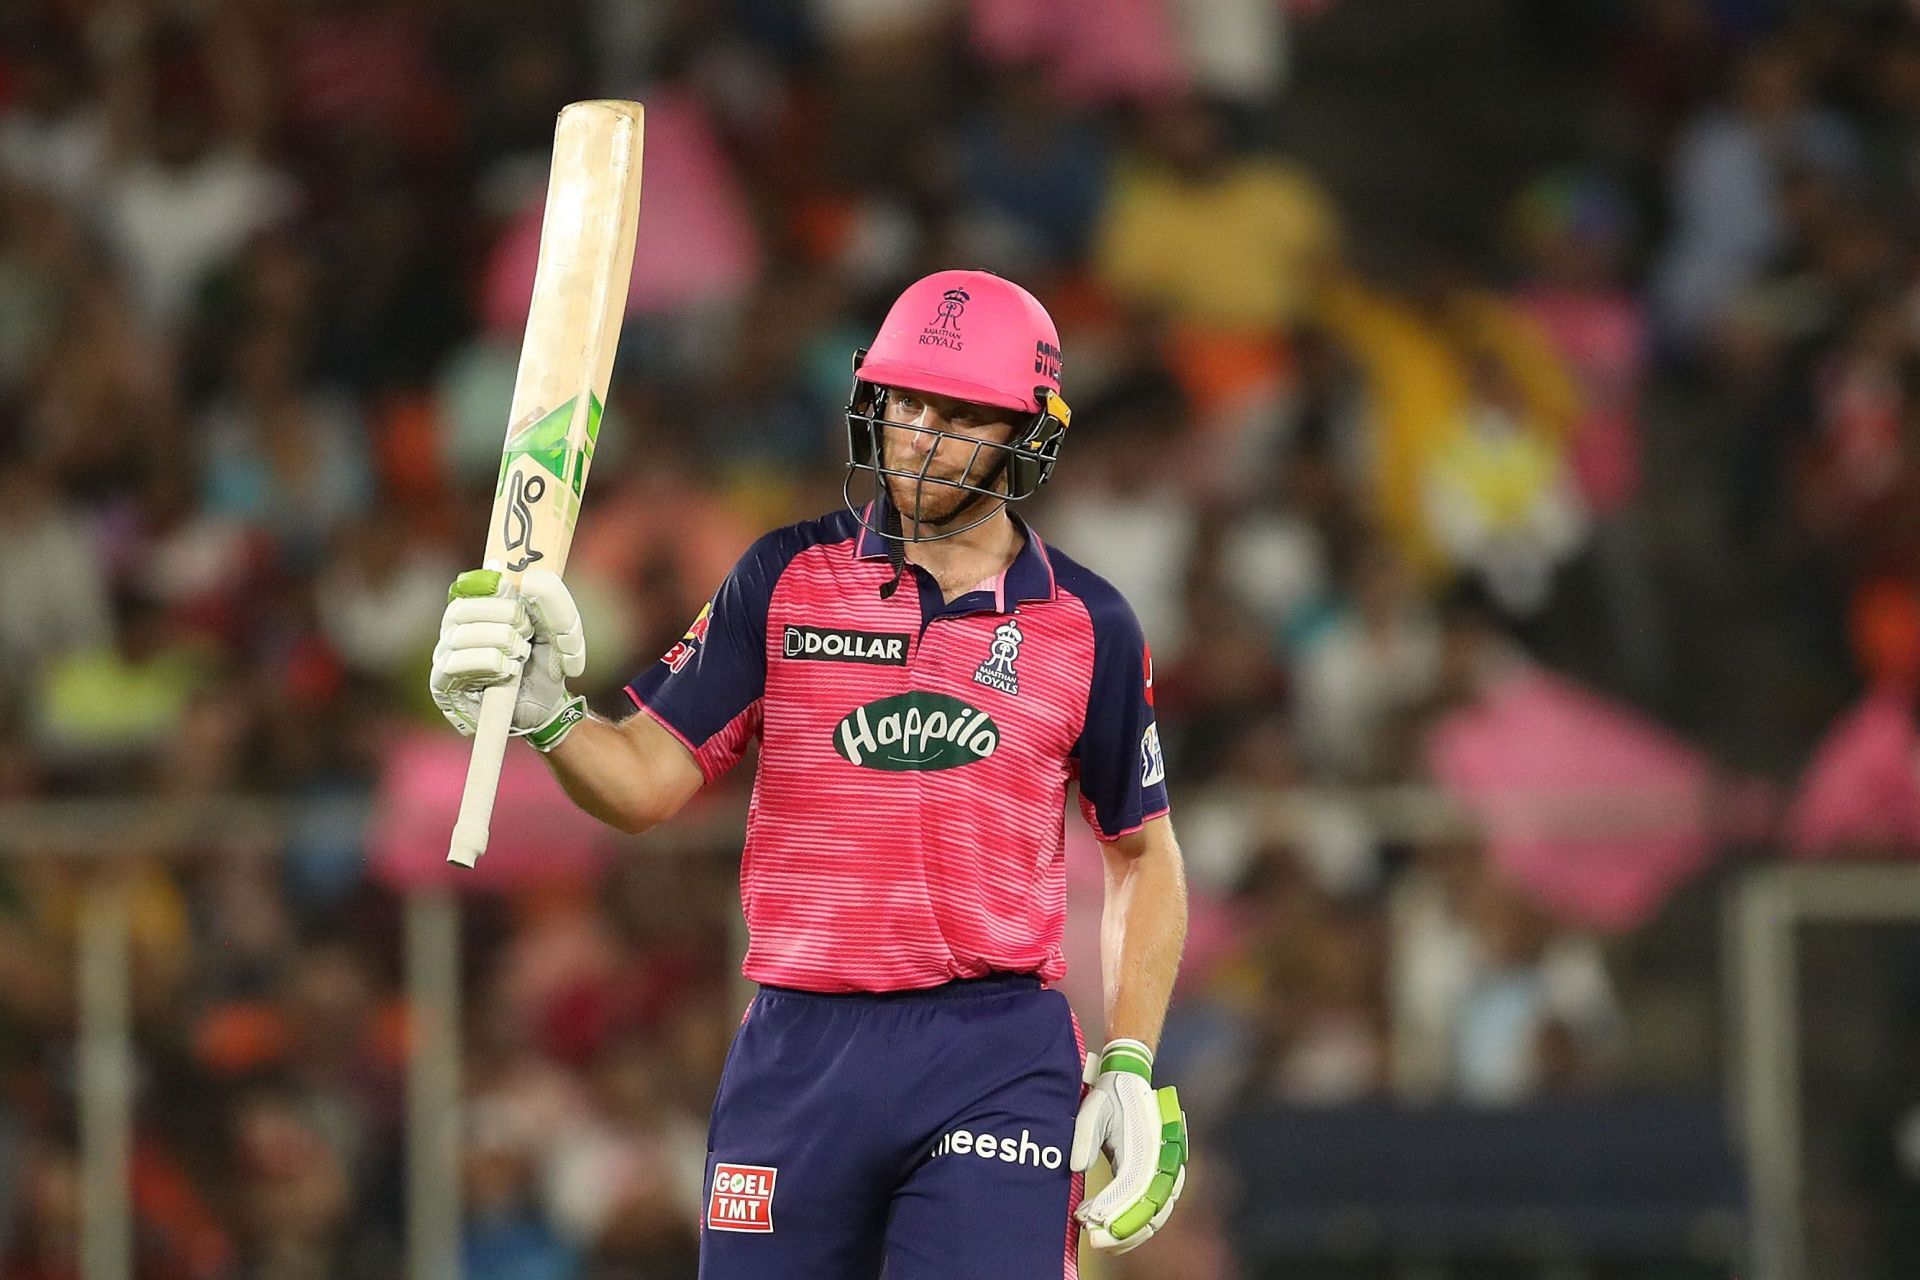 Jos Buttler has scored a staggering 824 runs at an average of 58.86 so far [Credits: IPL]